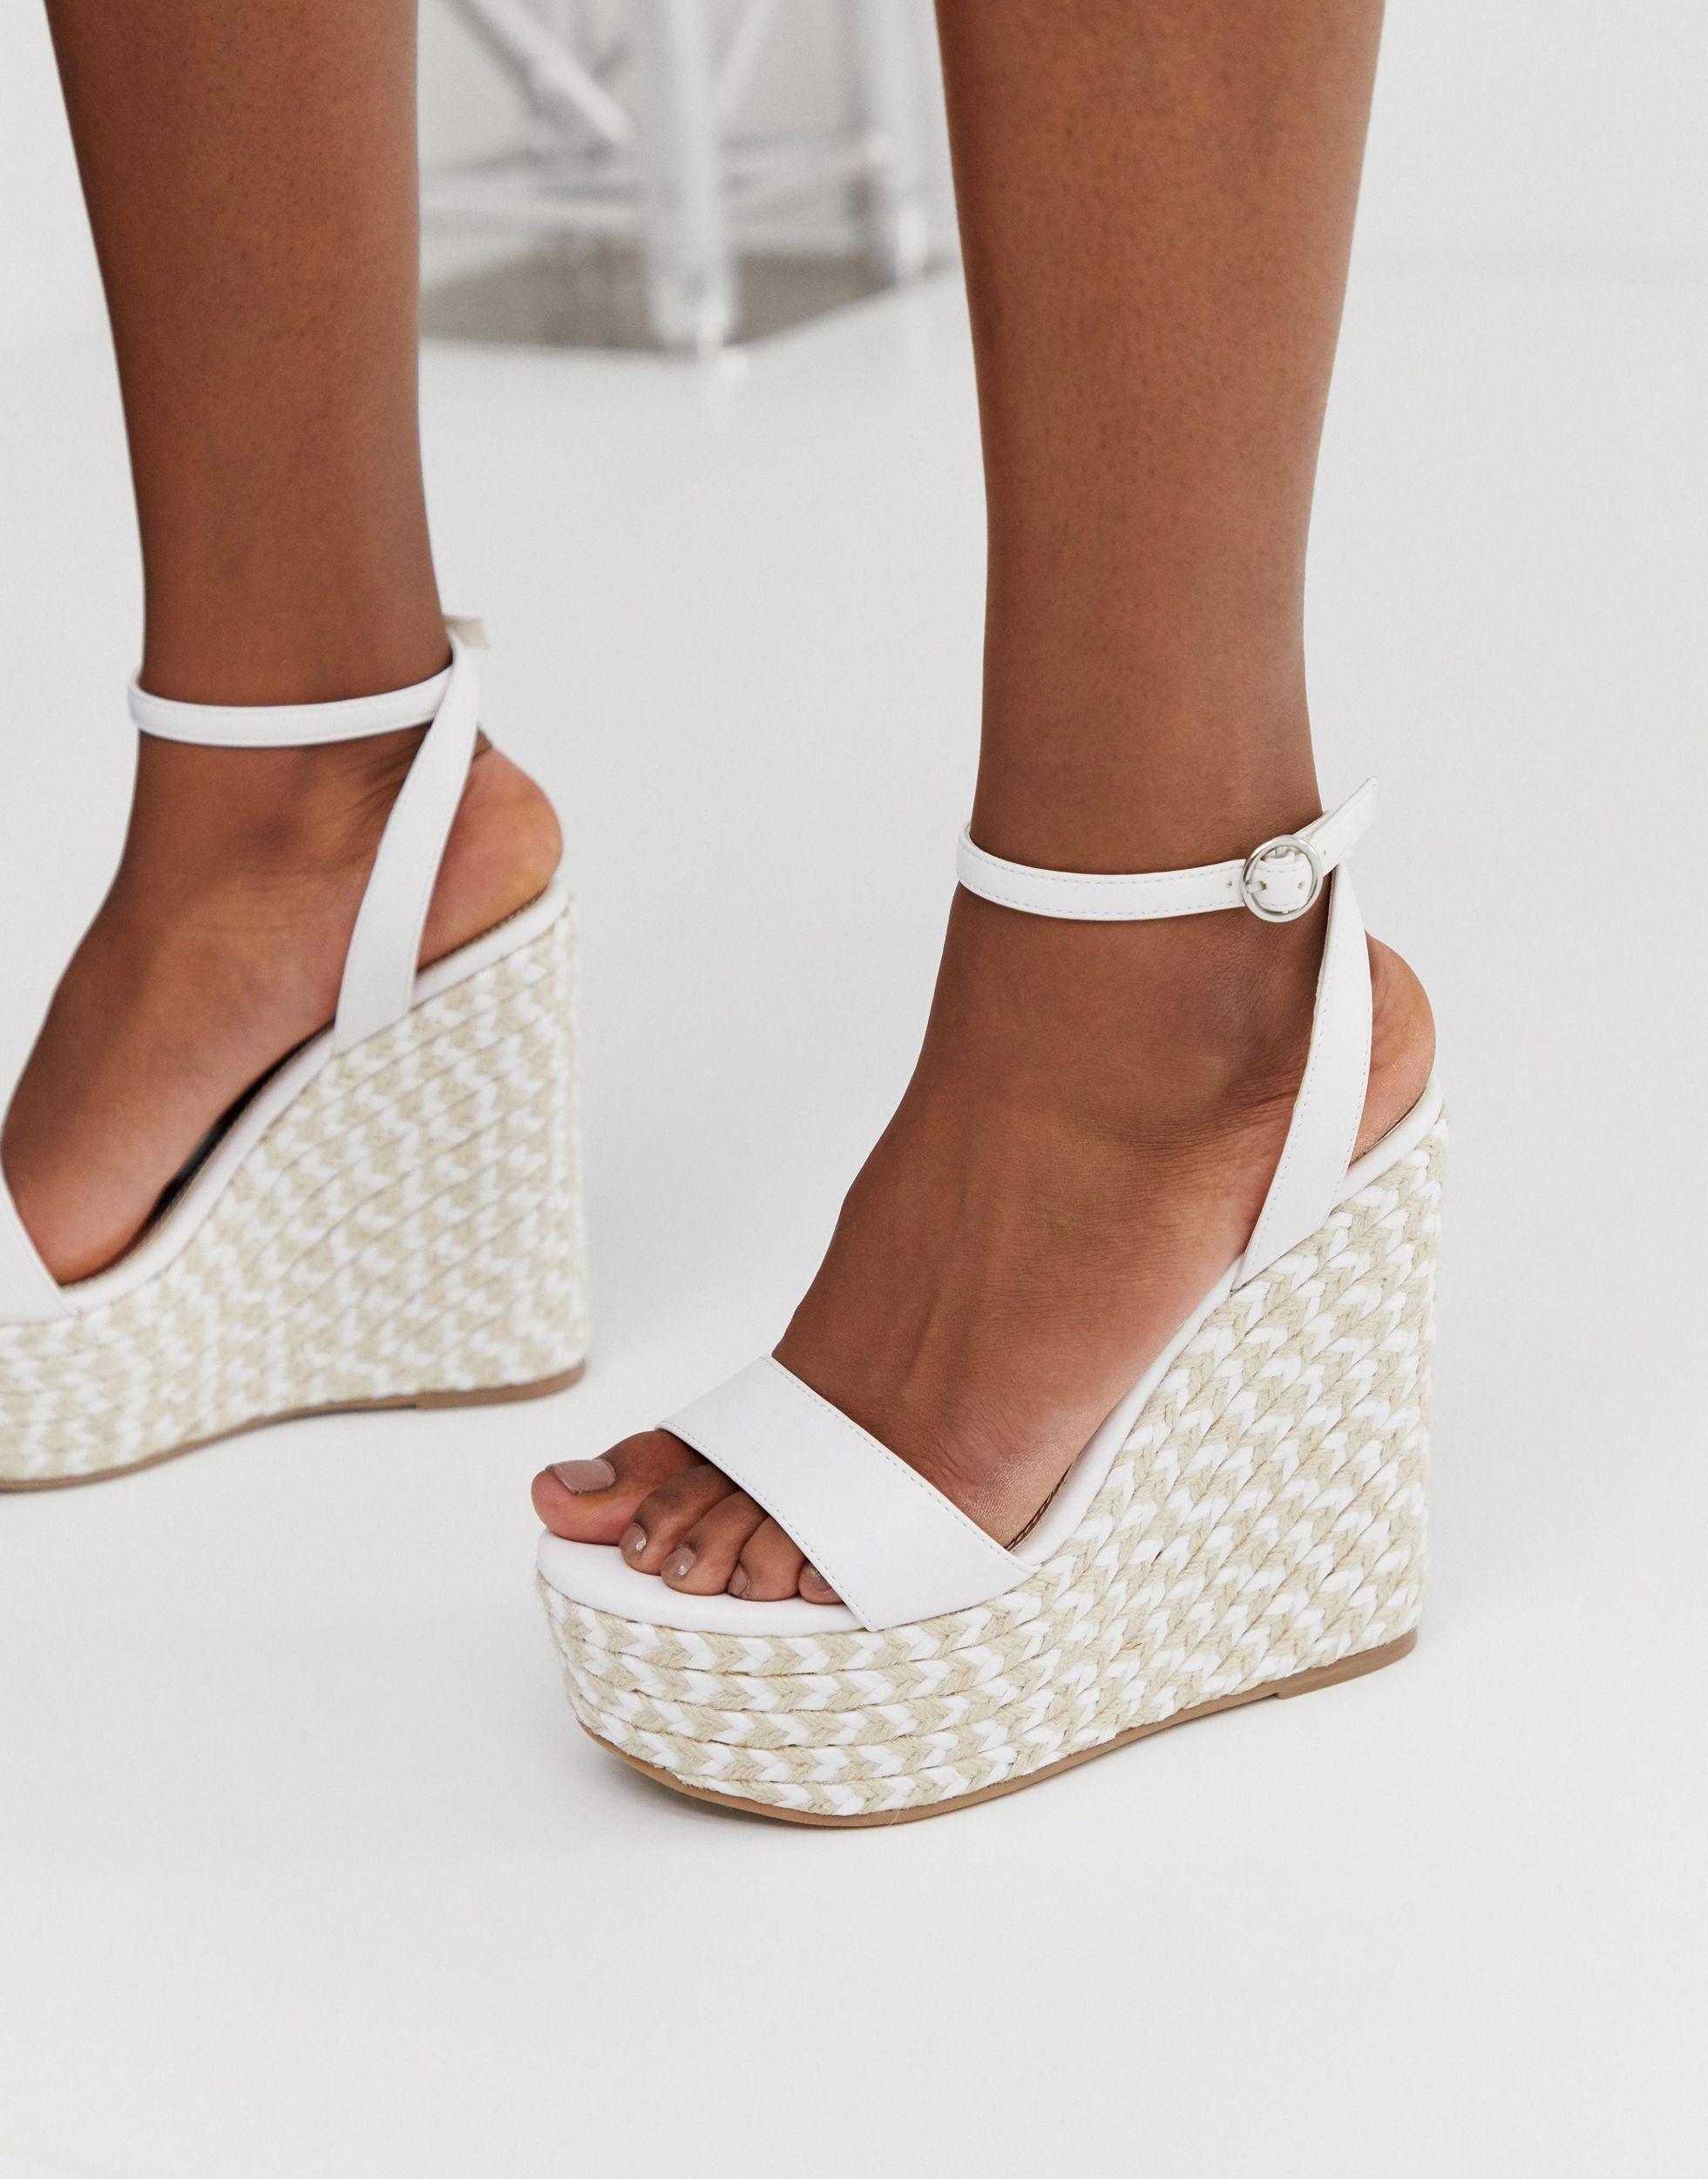 ASOS Leather Justina Espadrille Wedges in White Lyst